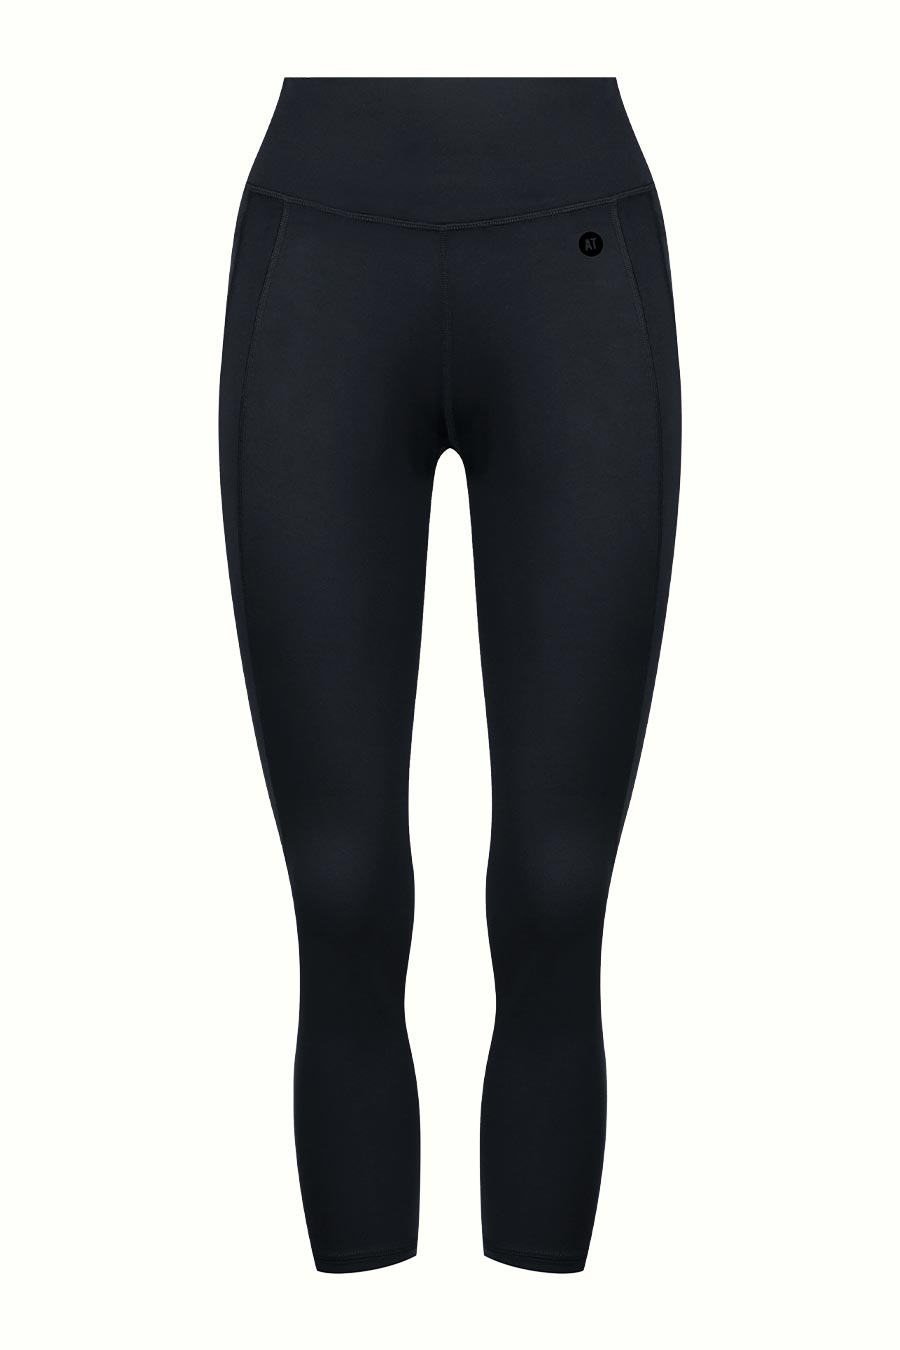 Freemotion Anti-Chafe 7/8 Length Tight -Black from Active Truth™
